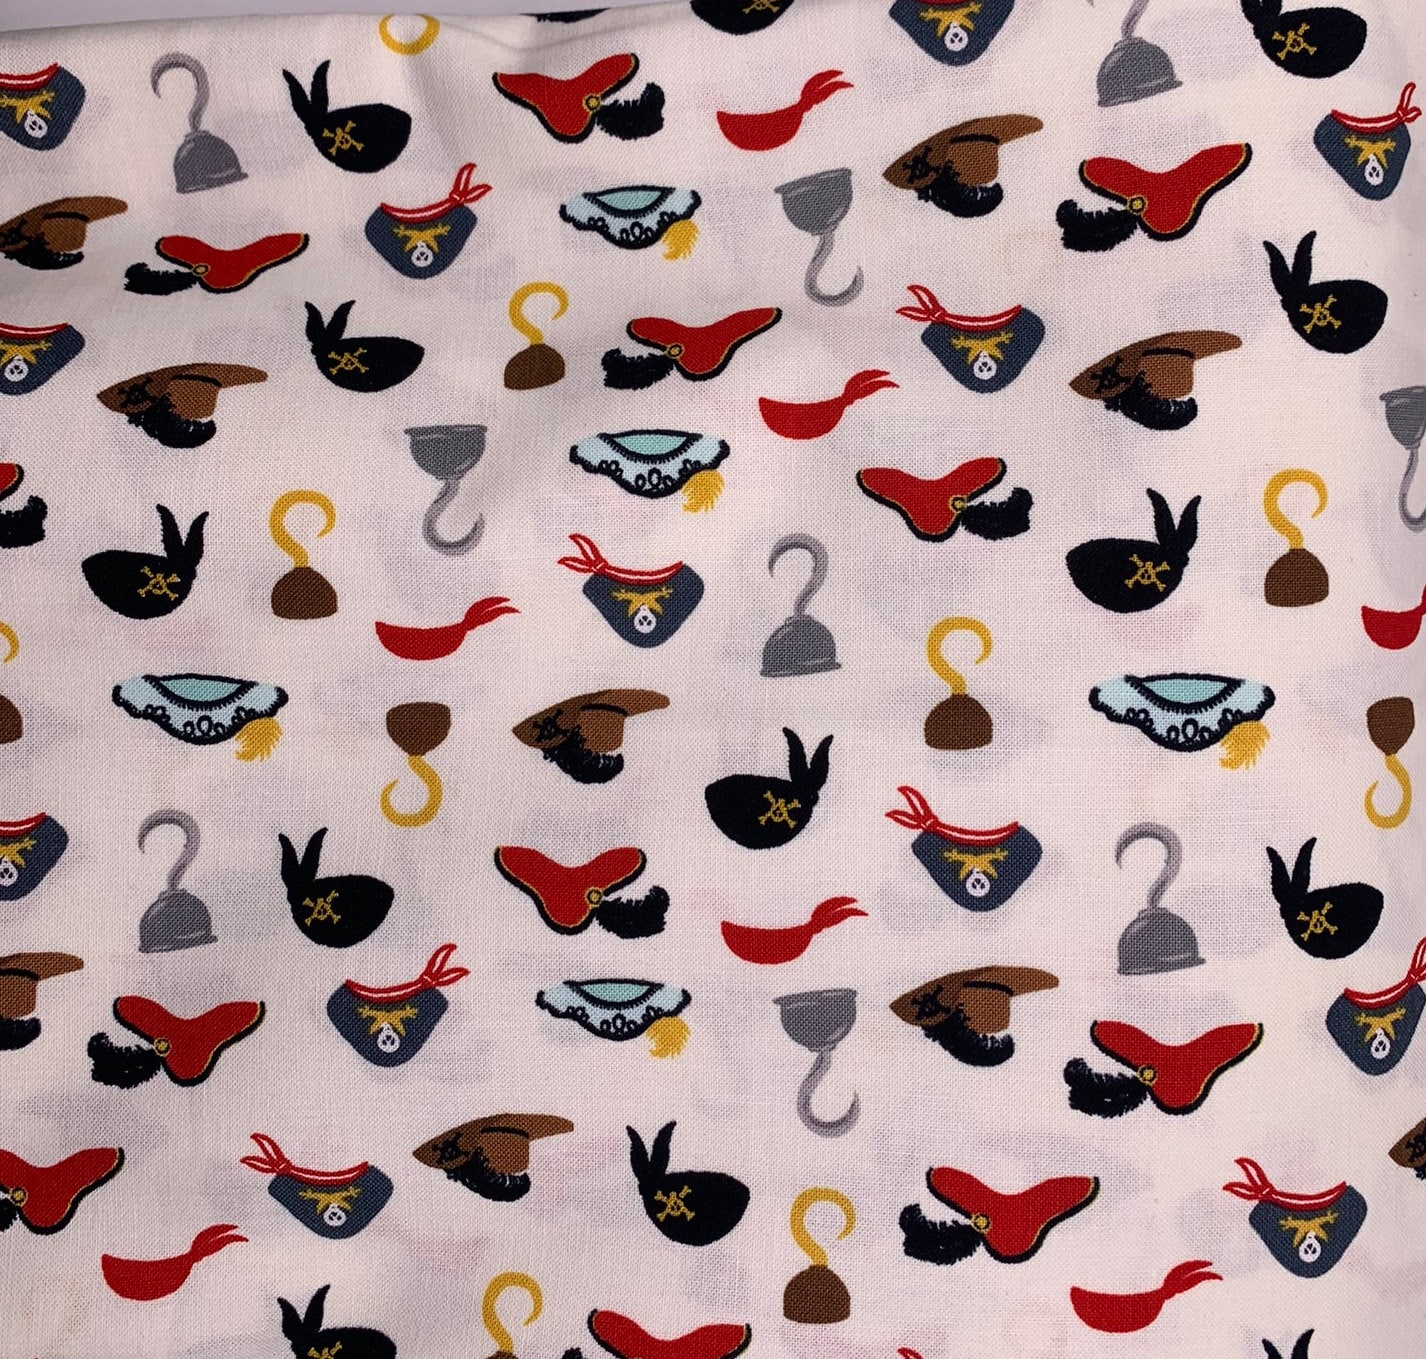 High Quality Quilt Fabric-Sold by the Yard-Riley Blake Designs-Pirate Hats-100% Cotton Fabric